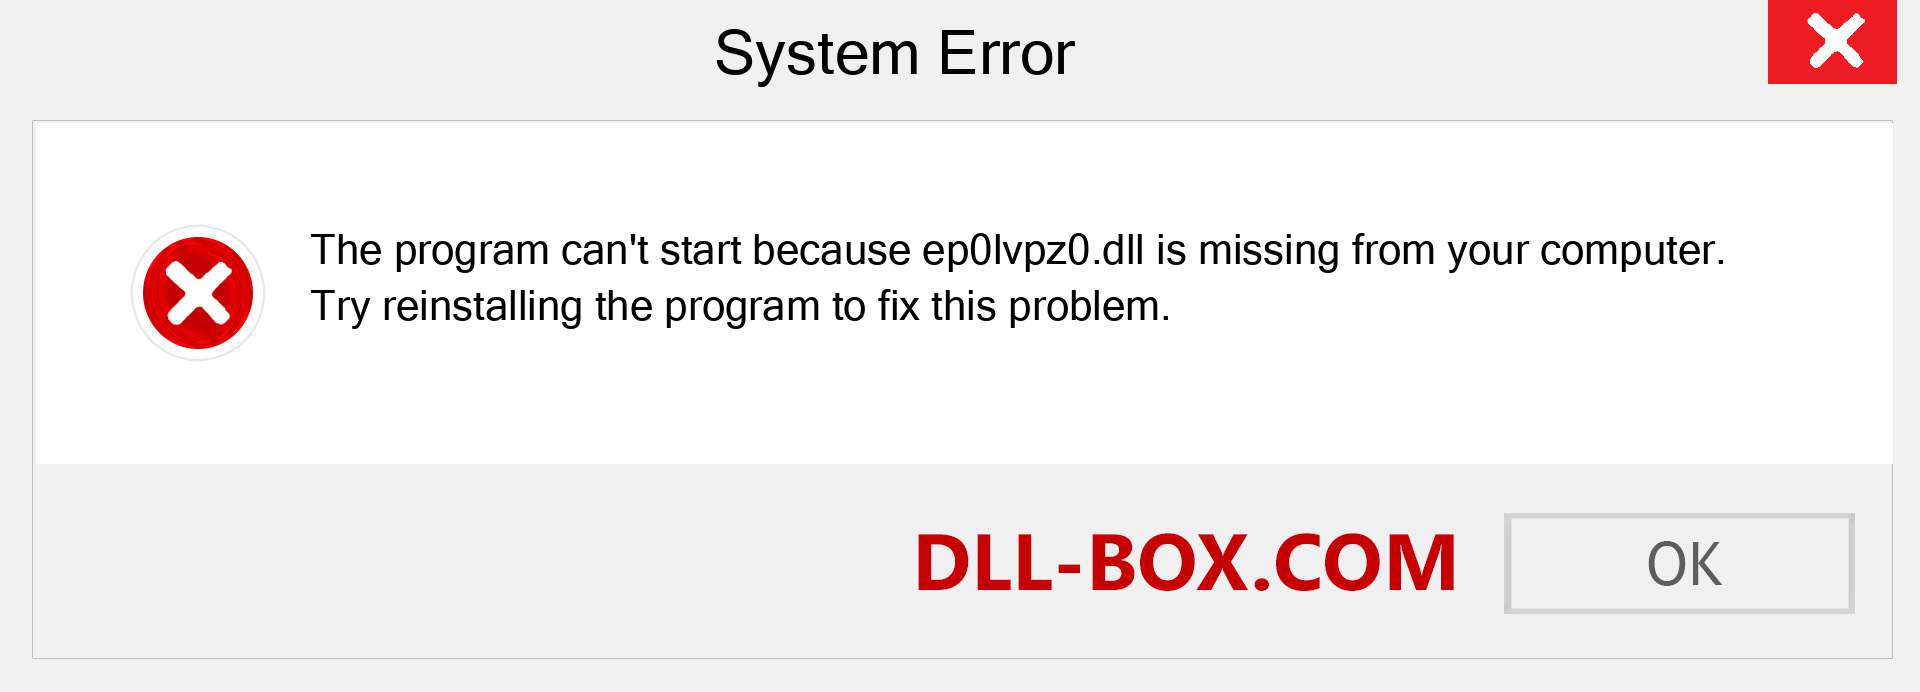  ep0lvpz0.dll file is missing?. Download for Windows 7, 8, 10 - Fix  ep0lvpz0 dll Missing Error on Windows, photos, images